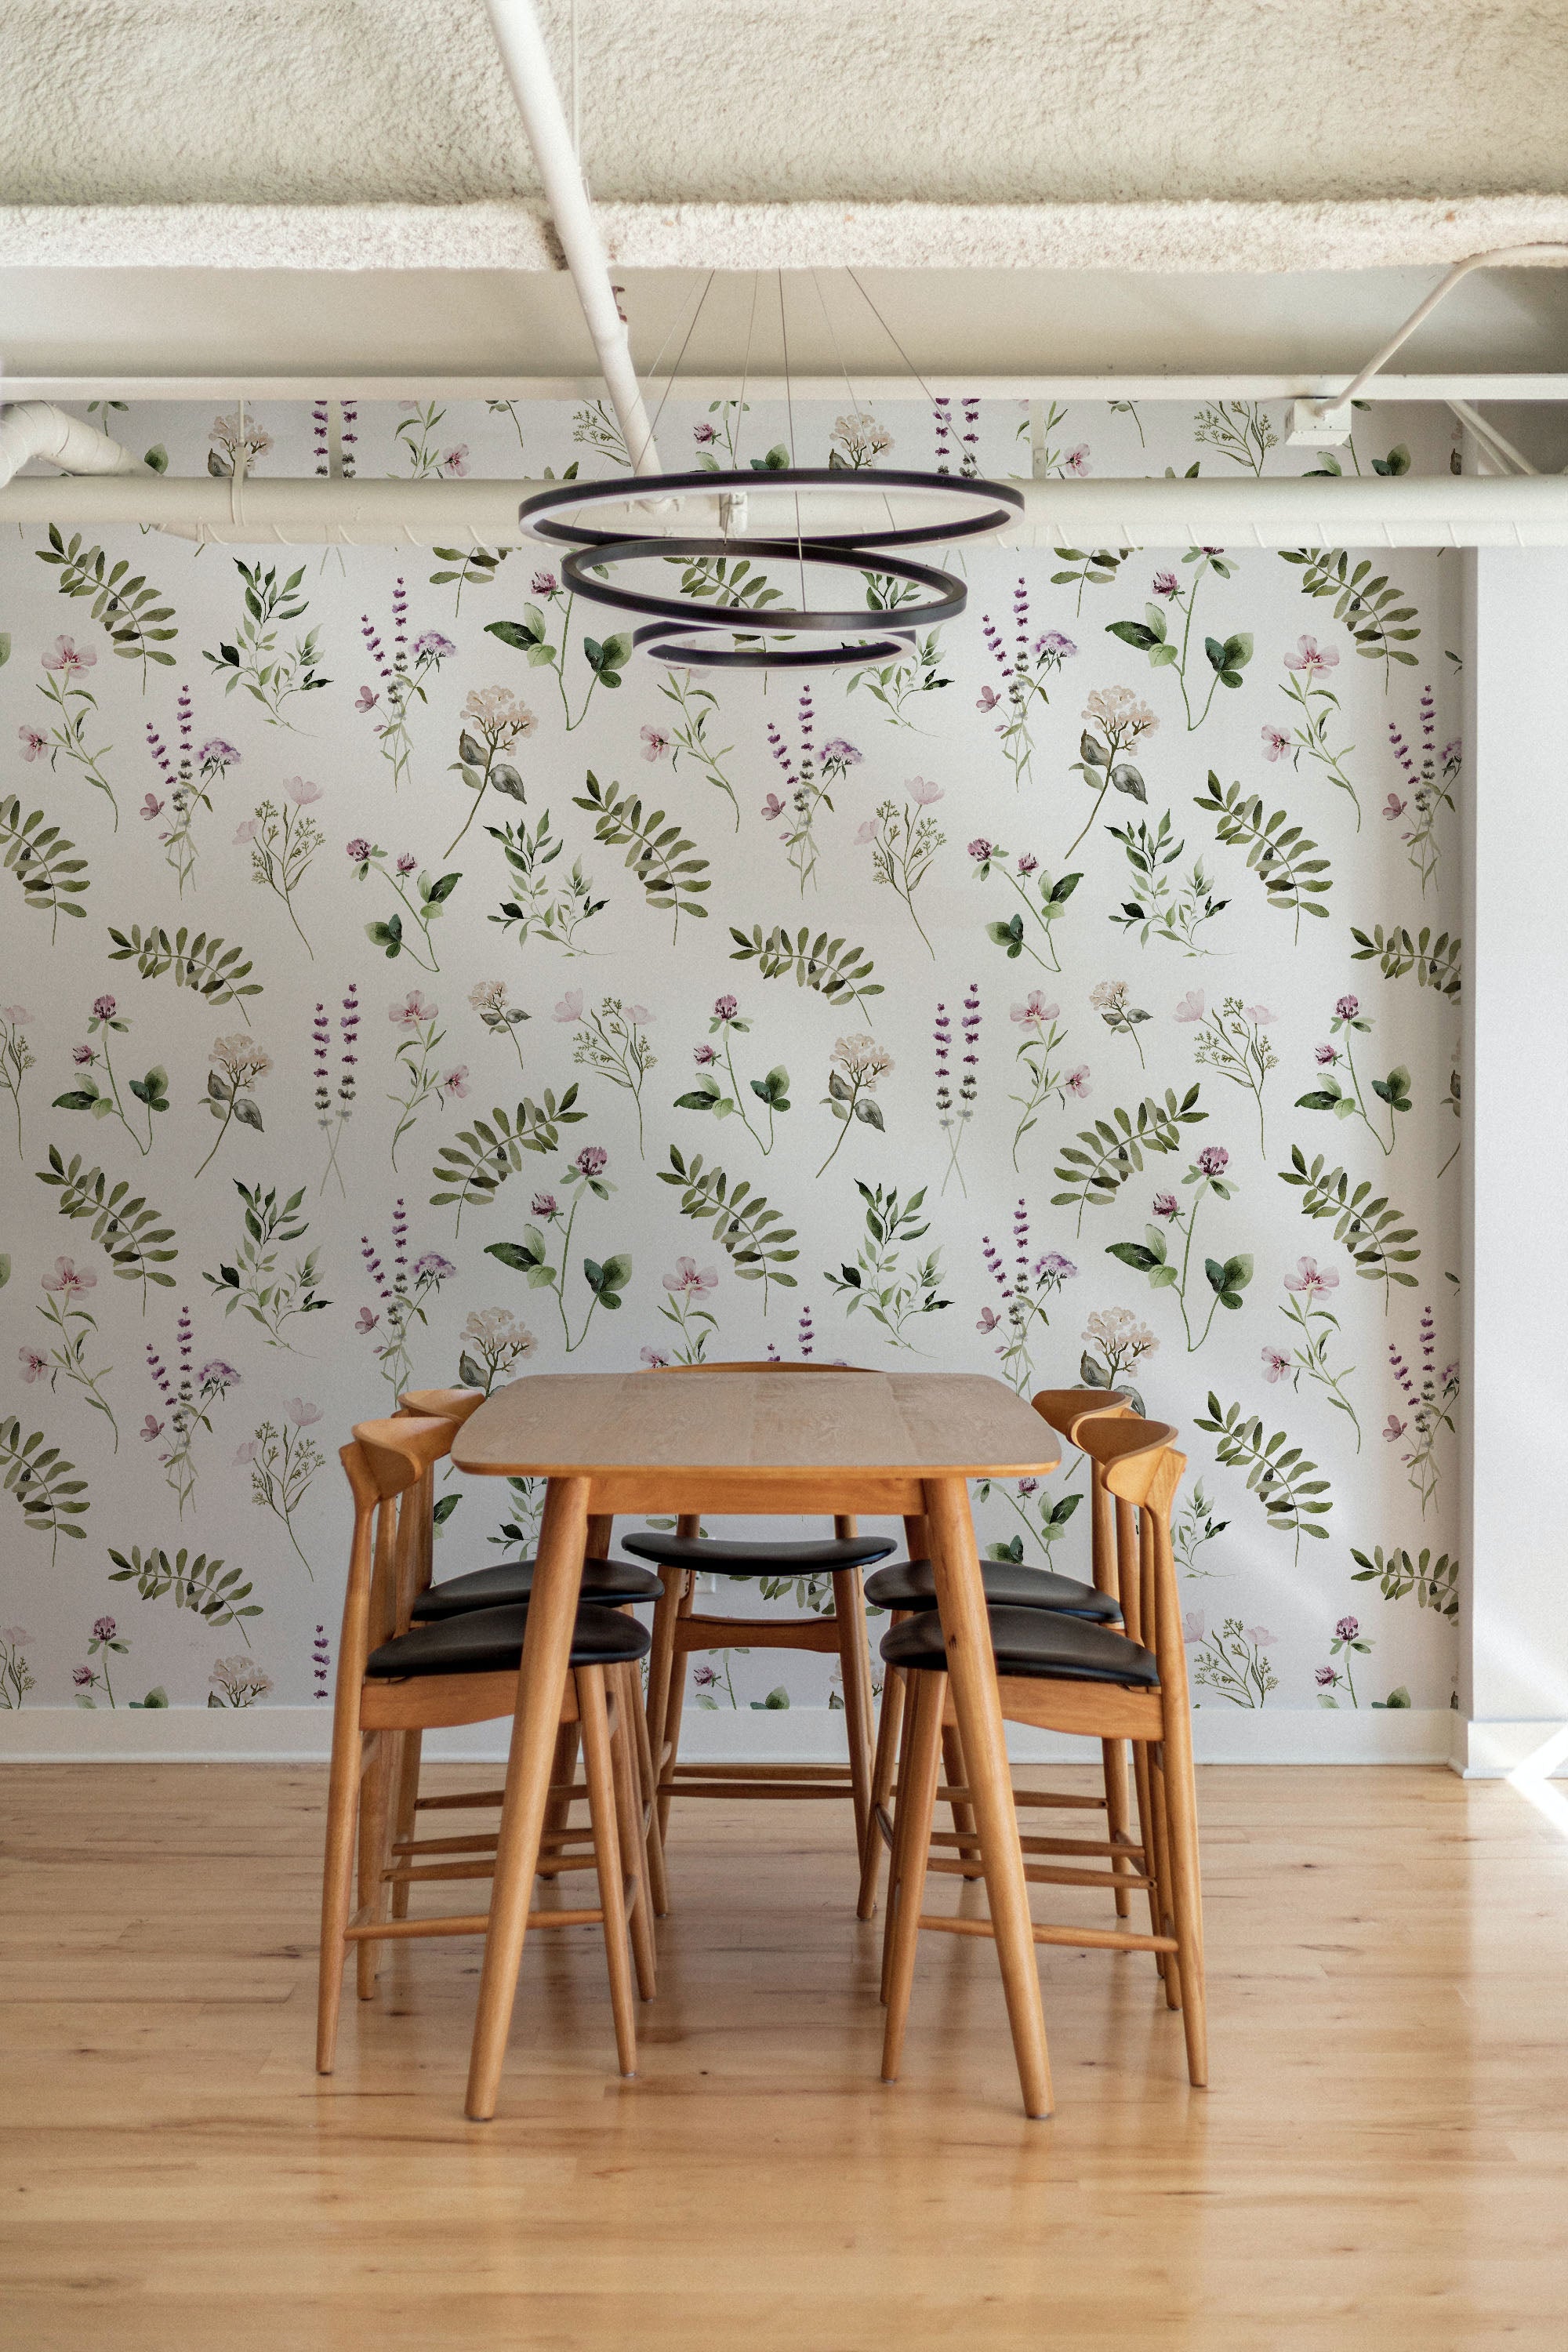 A dining area featuring walls covered with "Midsummer Watercolour Floral & Fern Wallpaper." The room is furnished with a simple wooden dining table and chairs, with the wallpaper providing a lively backdrop of green ferns and pastel flowers, creating a calming and inviting environment.